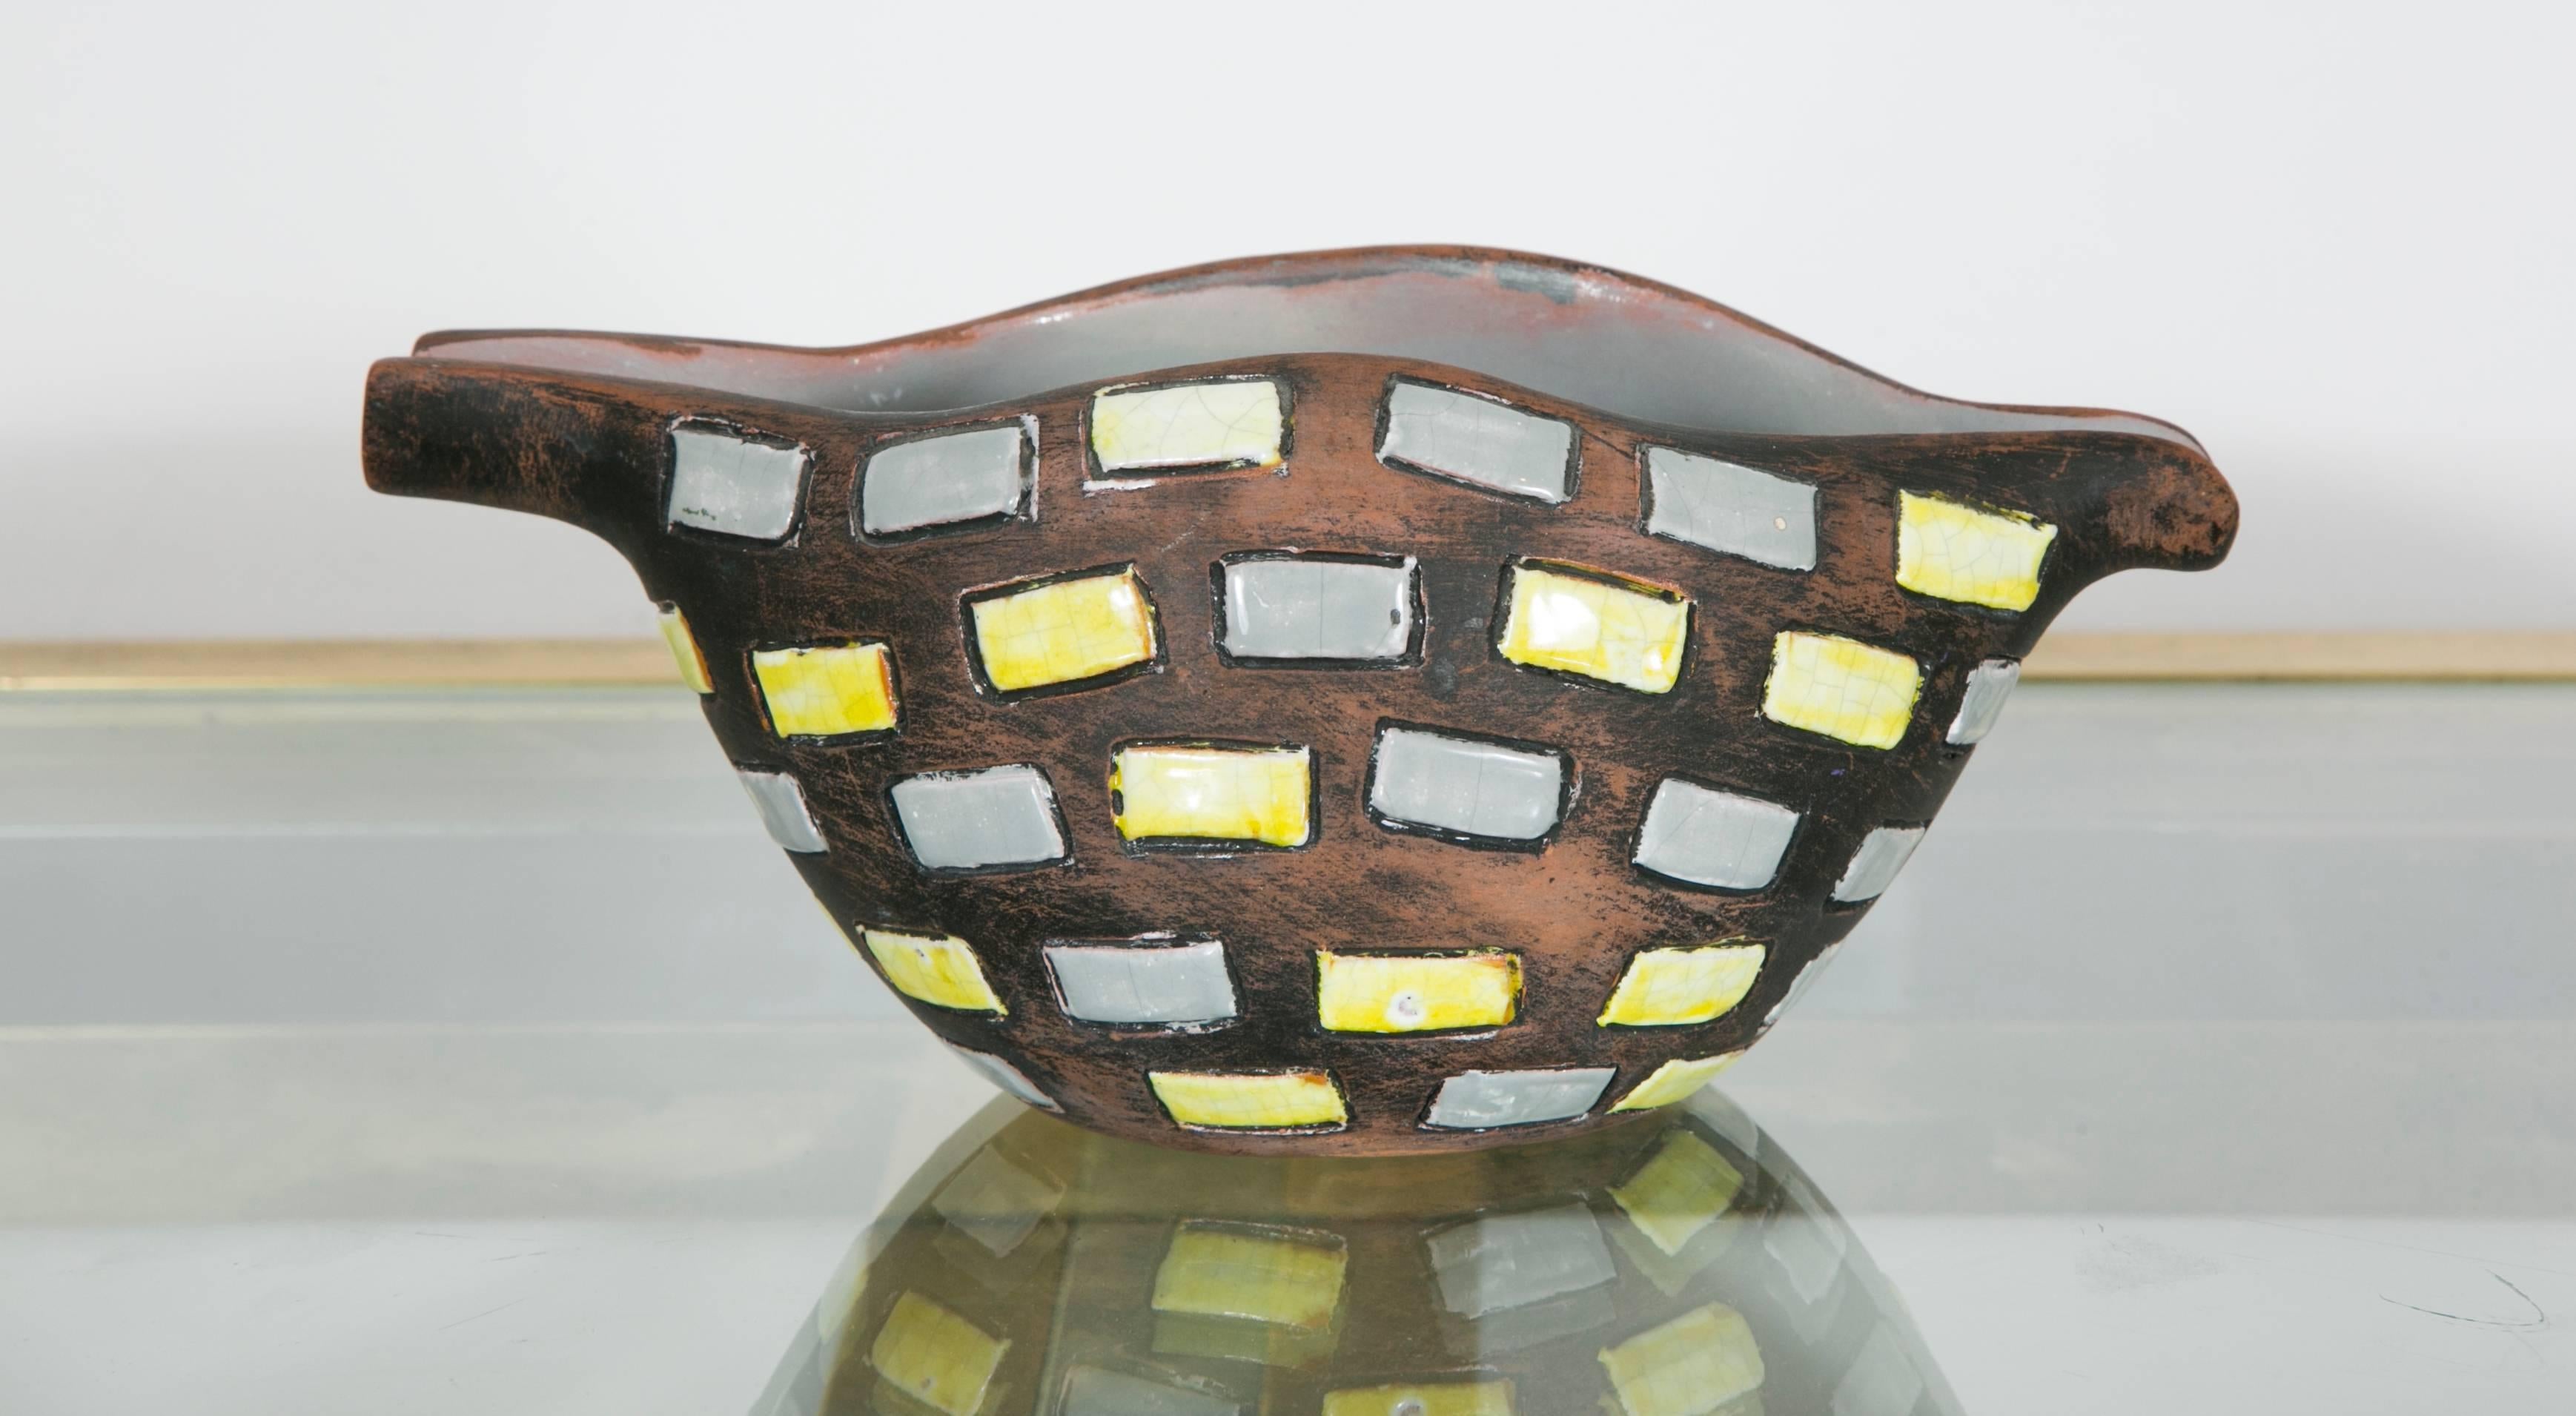 Unusual ceramic bowl or vase.
Partly glazed in yellow and grey.
Signed : Raymor, Italy
Italy, 1970s.